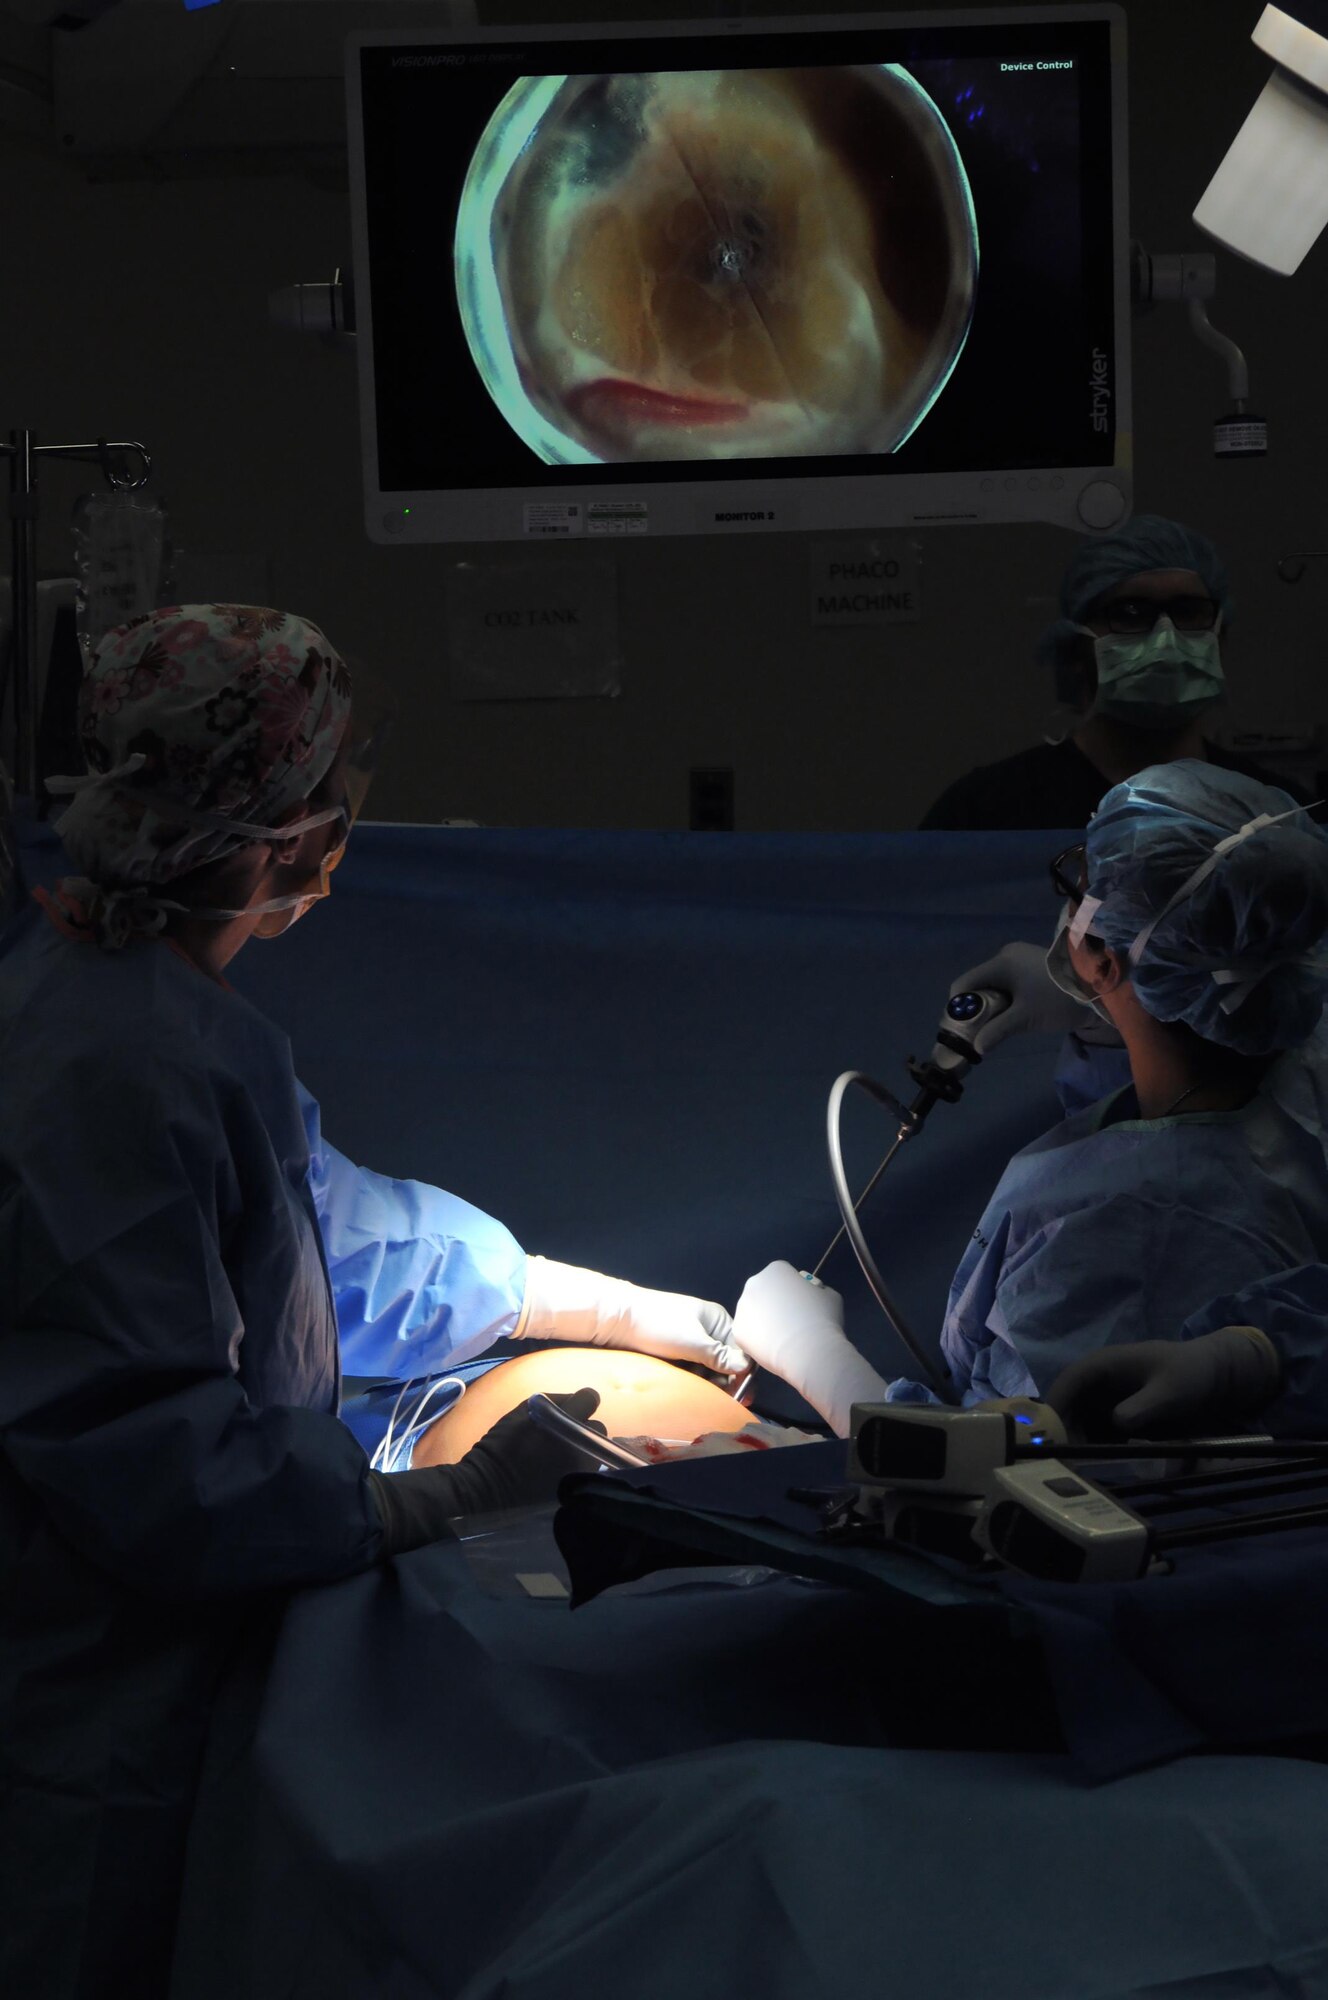 Maj. Lauren Buck, an 81st Surgical Operations Squadron general surgeon, and a surgical technician perform a da Vinci ventral hernia repair, March 28, 2017, at Keesler Air Force Base, Miss. This was the first robotic surgery in the Air Force. The robotic system enhances surgeons’ mobility and range of motion. (U.S. Air Force photo by Senior Airman Jenay Randolph)